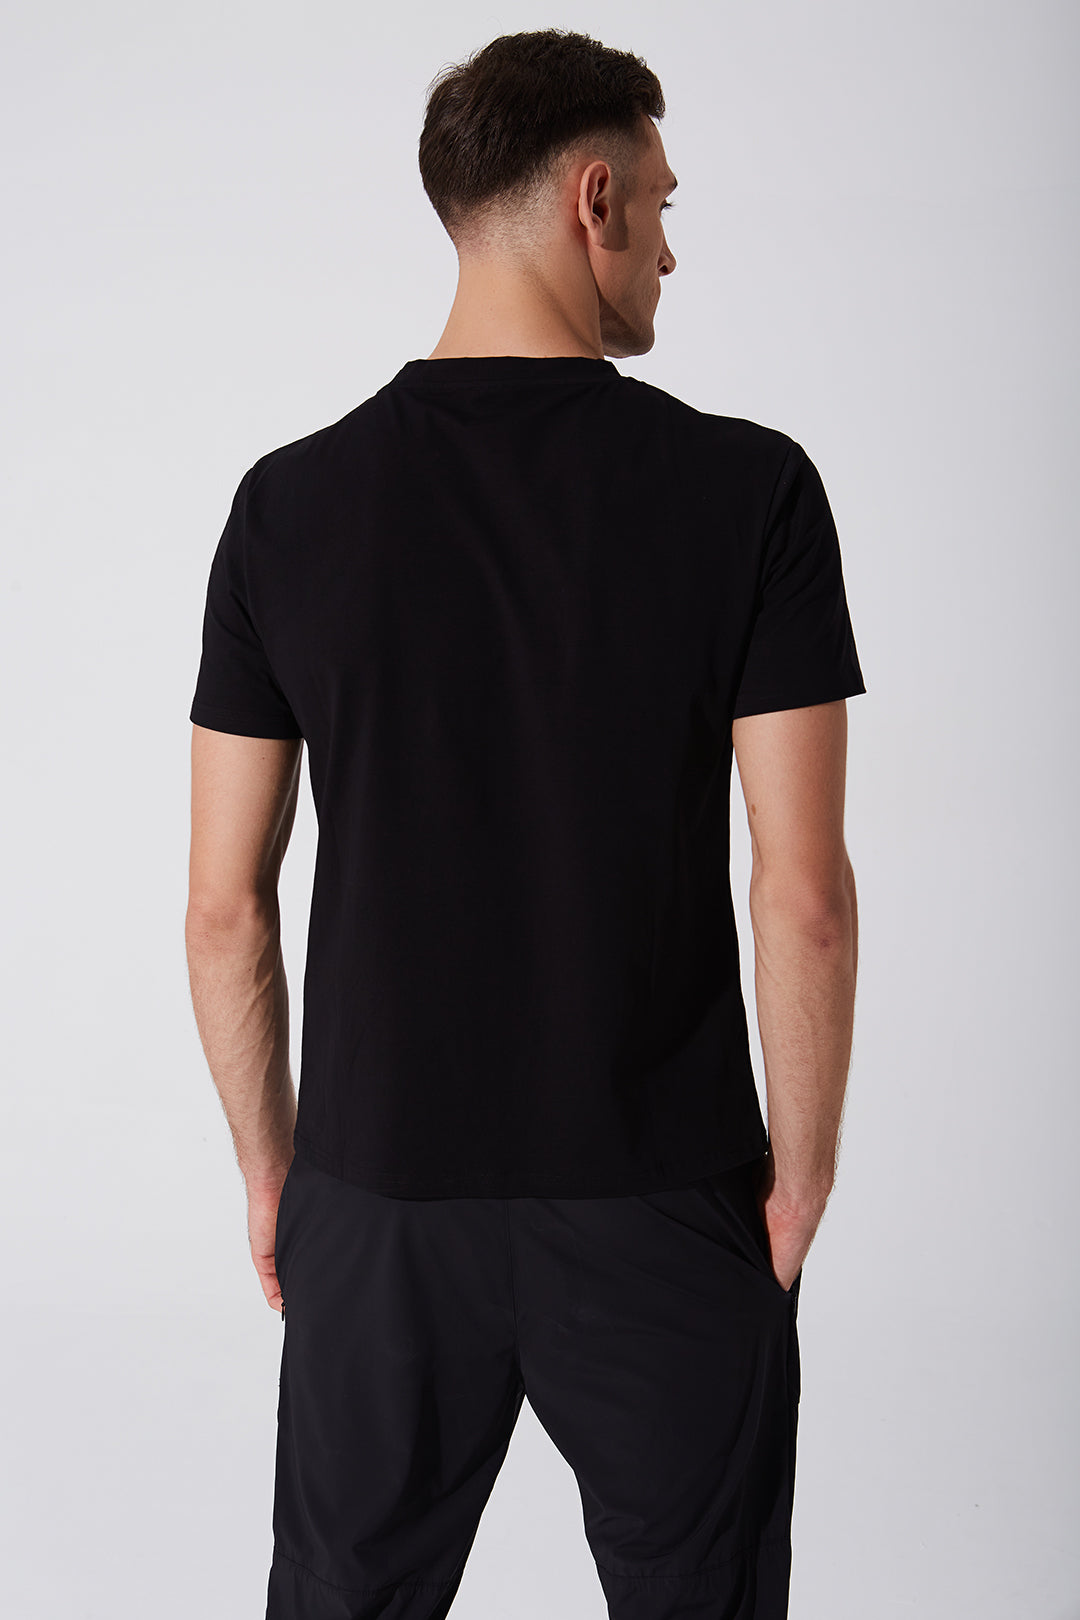 Unisex black short sleeve tee with OLABEN logo, perfect for men's casual style.